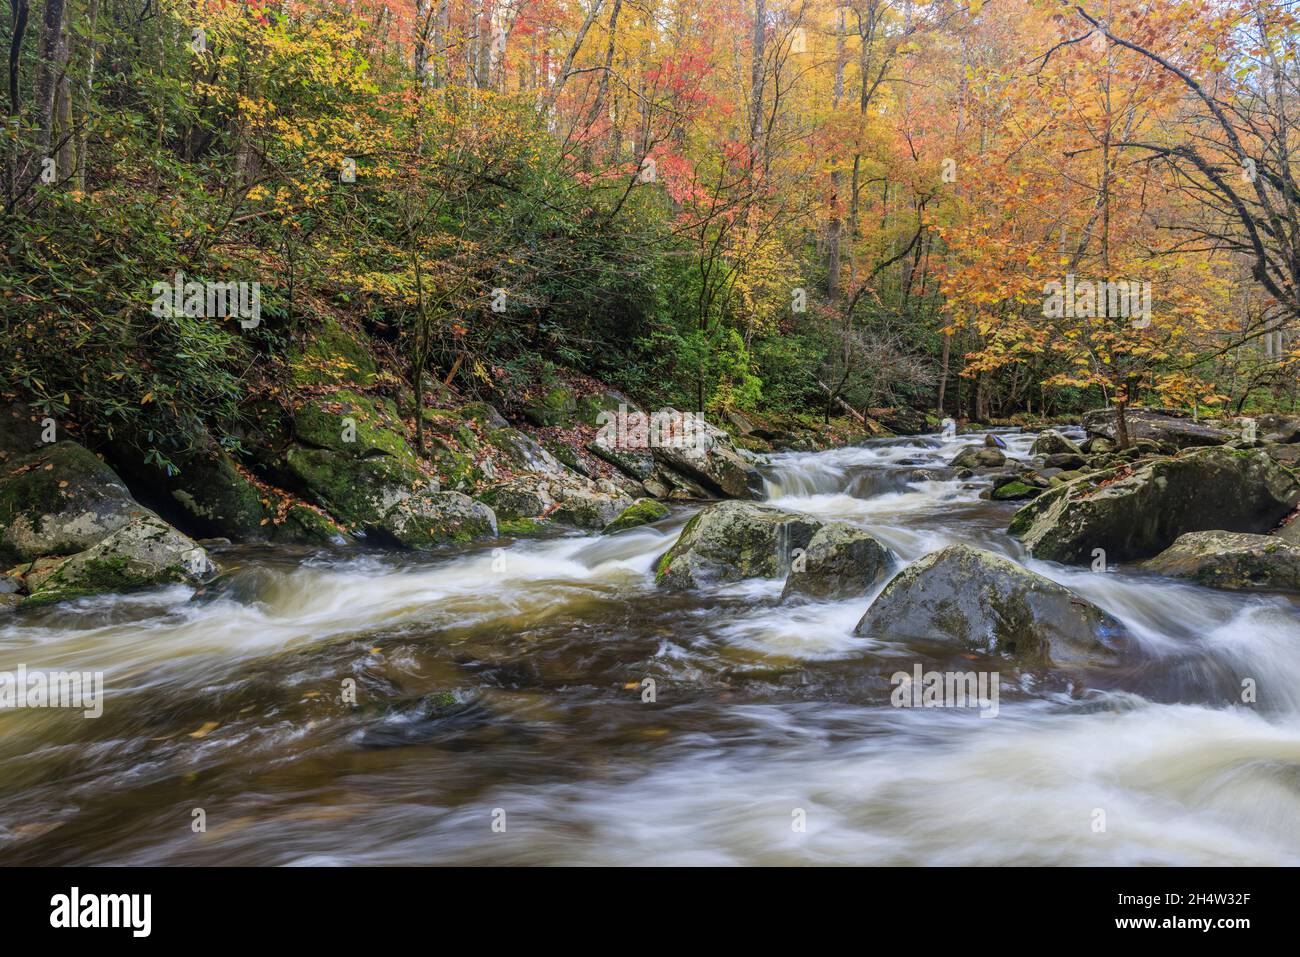 Il Middle Prong Little River scorre sulle rocce sotto il fogliame autunnale nel Great Smoky Mountains National Park. Foto Stock